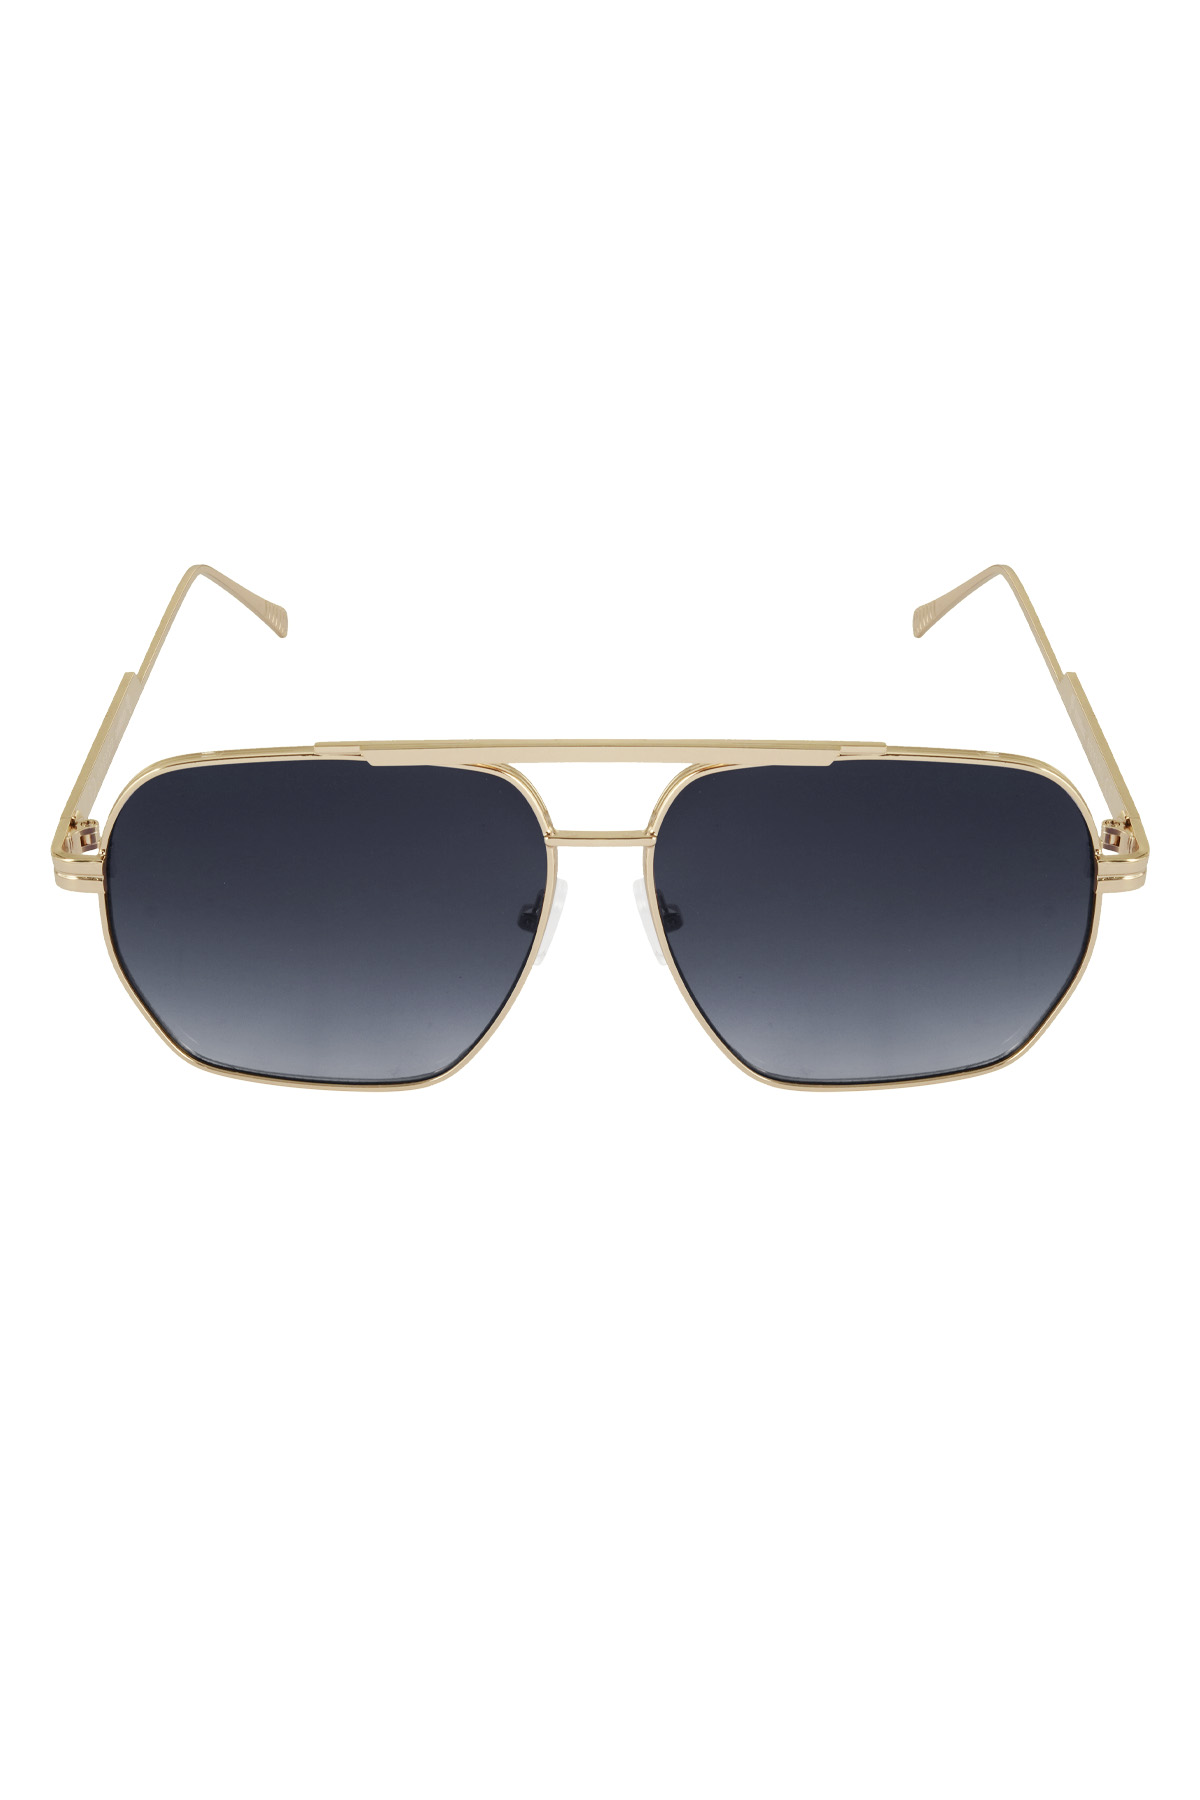 Metal summer sunglasses - Black and gold Picture4